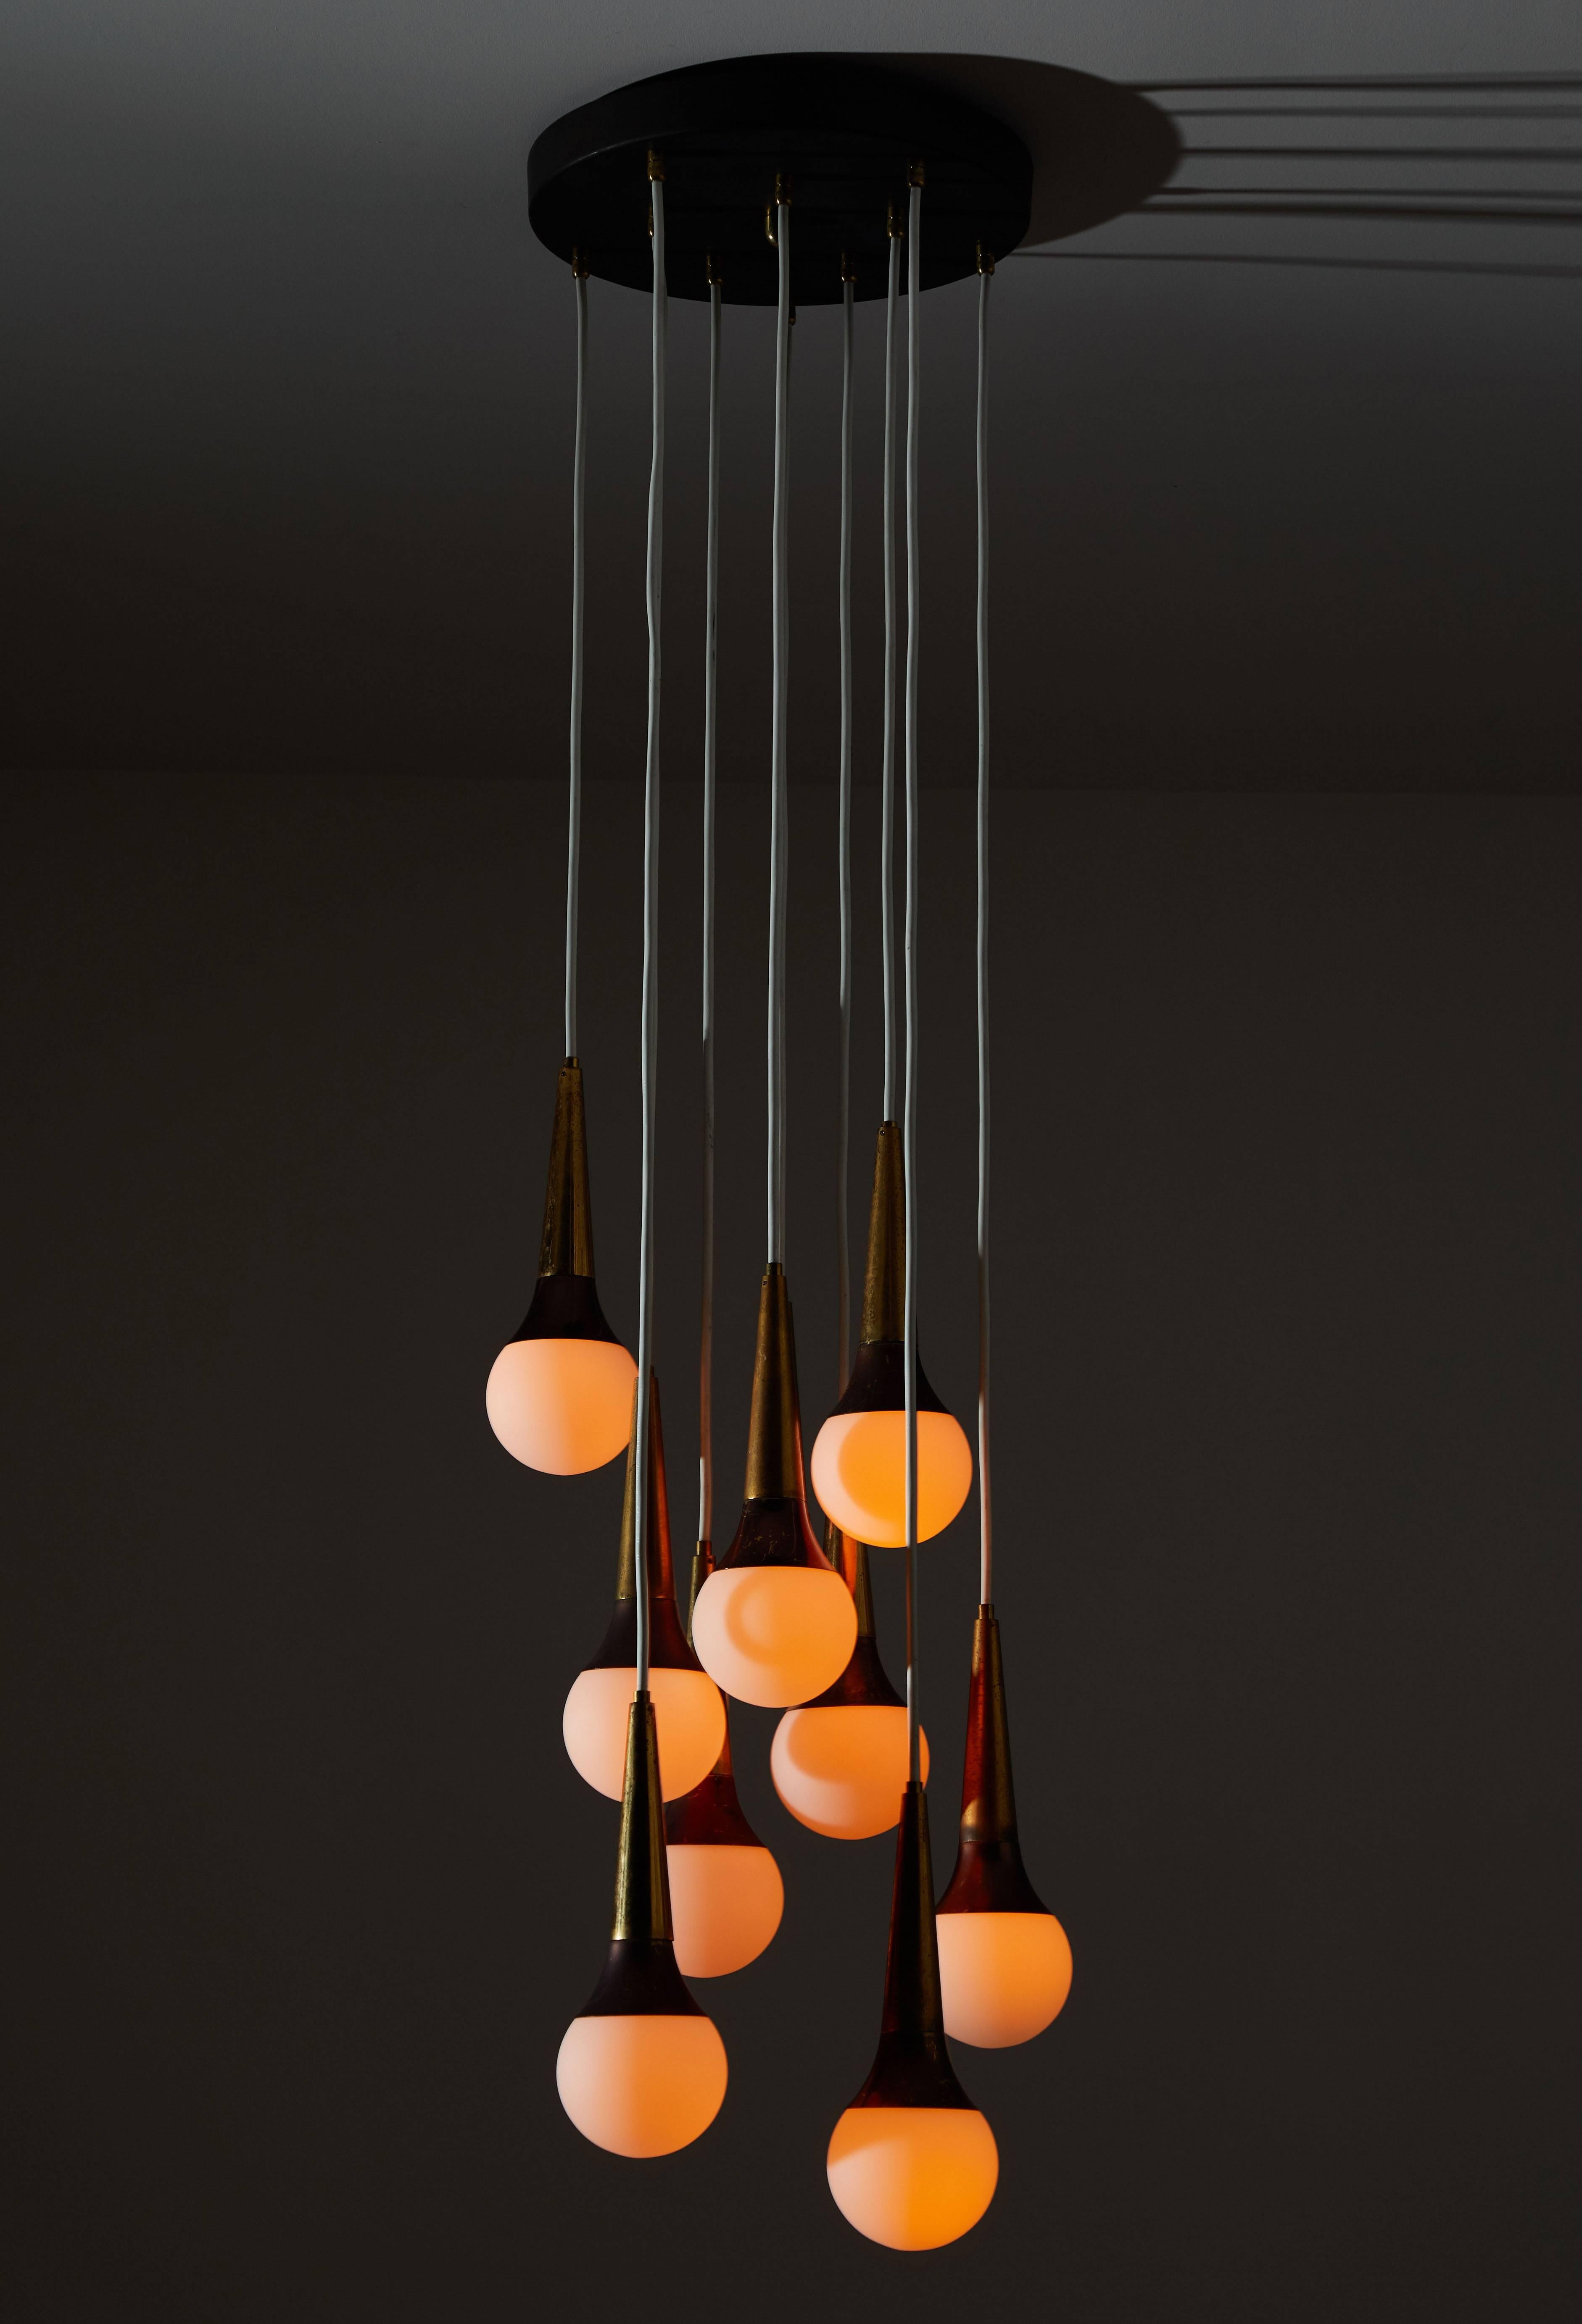 Nine-globe cascading chandelier by Stilnovo. Manufactured in Italy, circa 1960s. Brushed satin glass diffusers with brass hardware. Enameled metal canopy with cloth cords. Rewired for US junction boxes. Takes nine E14 European candelabra bulbs.